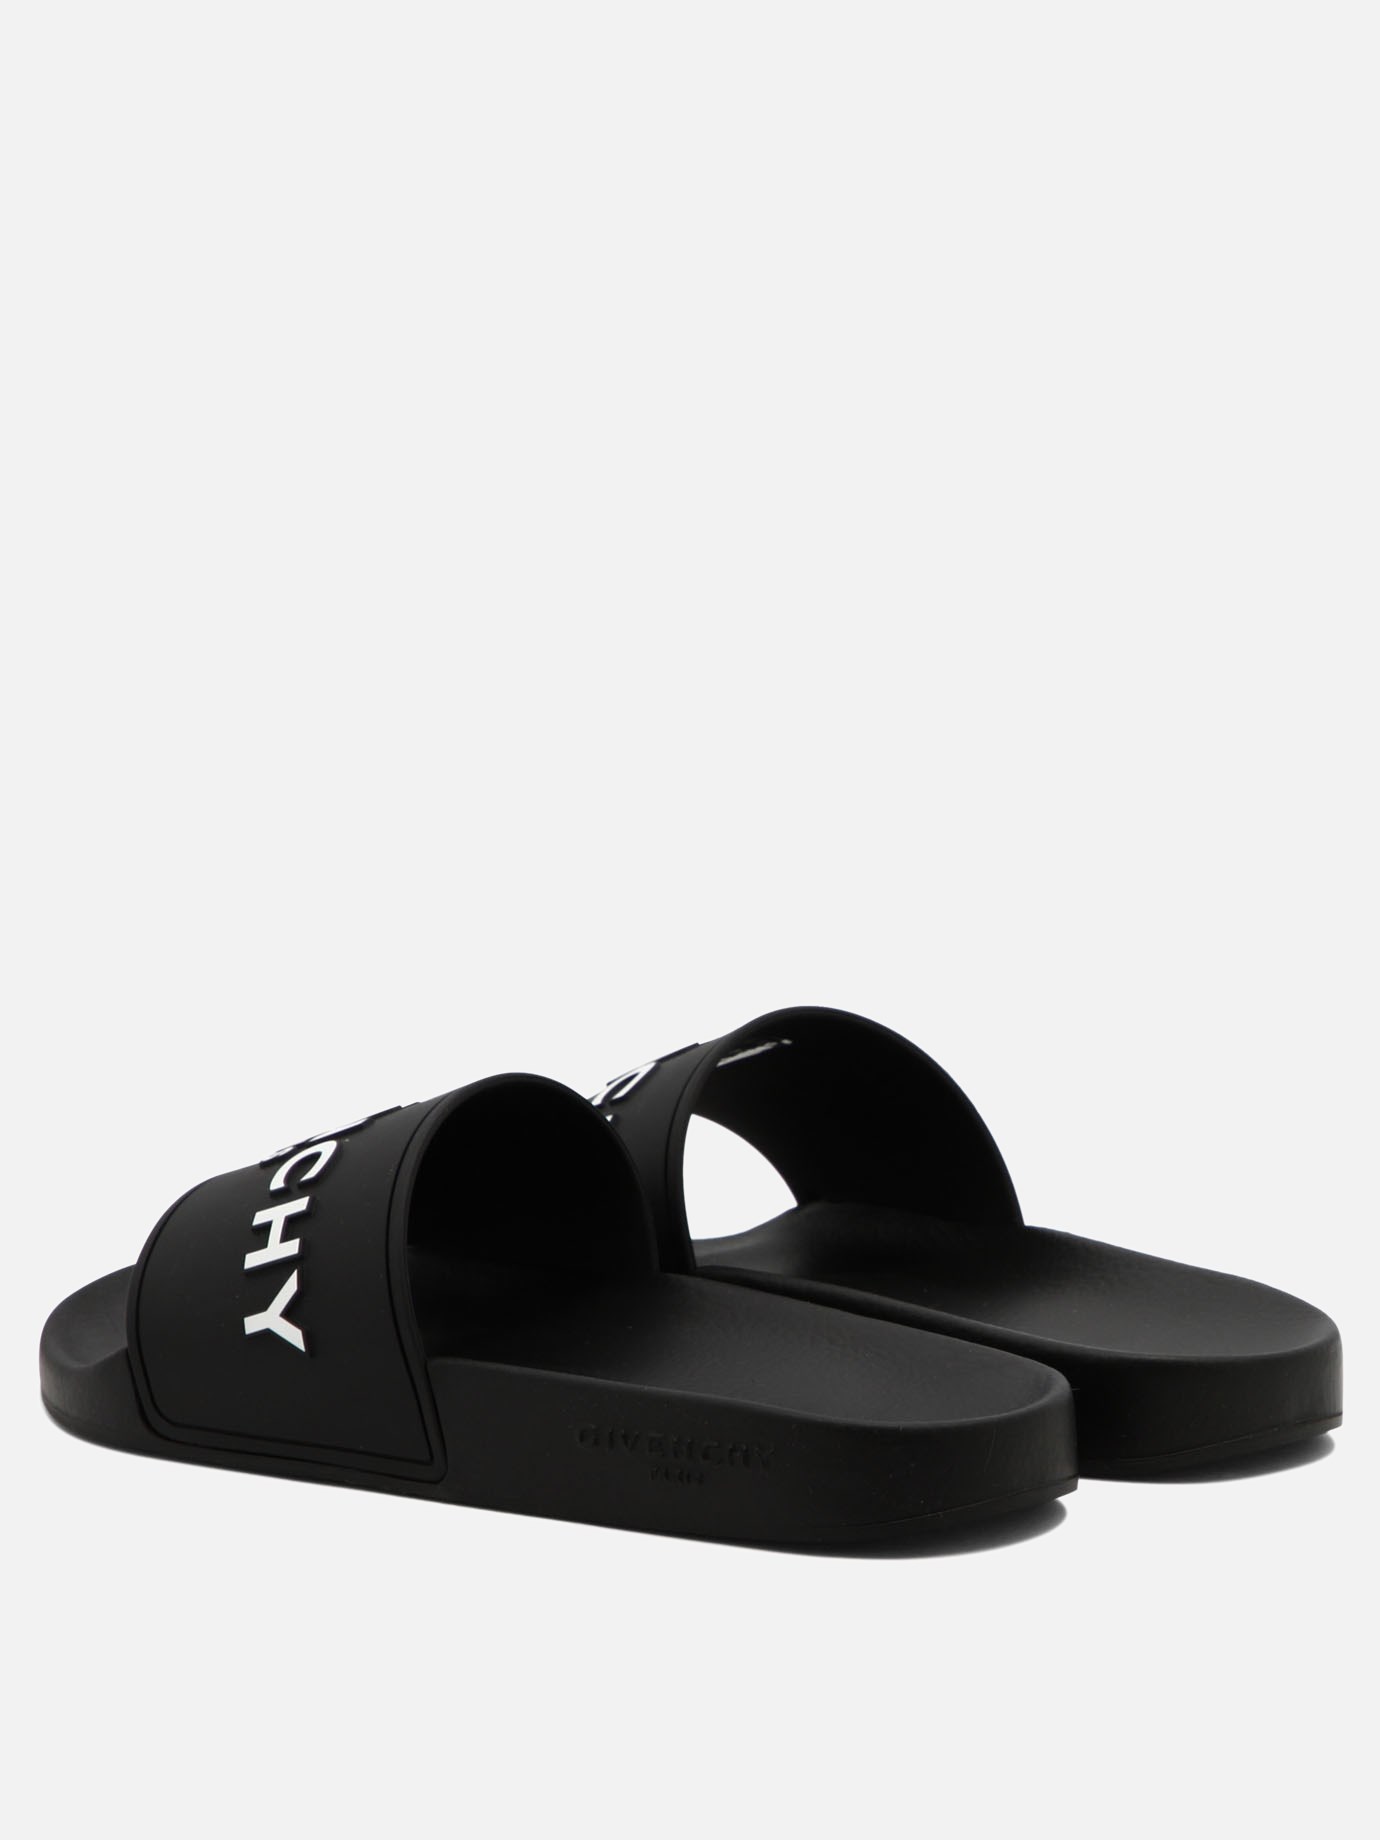  Slide  sandals by Givenchy